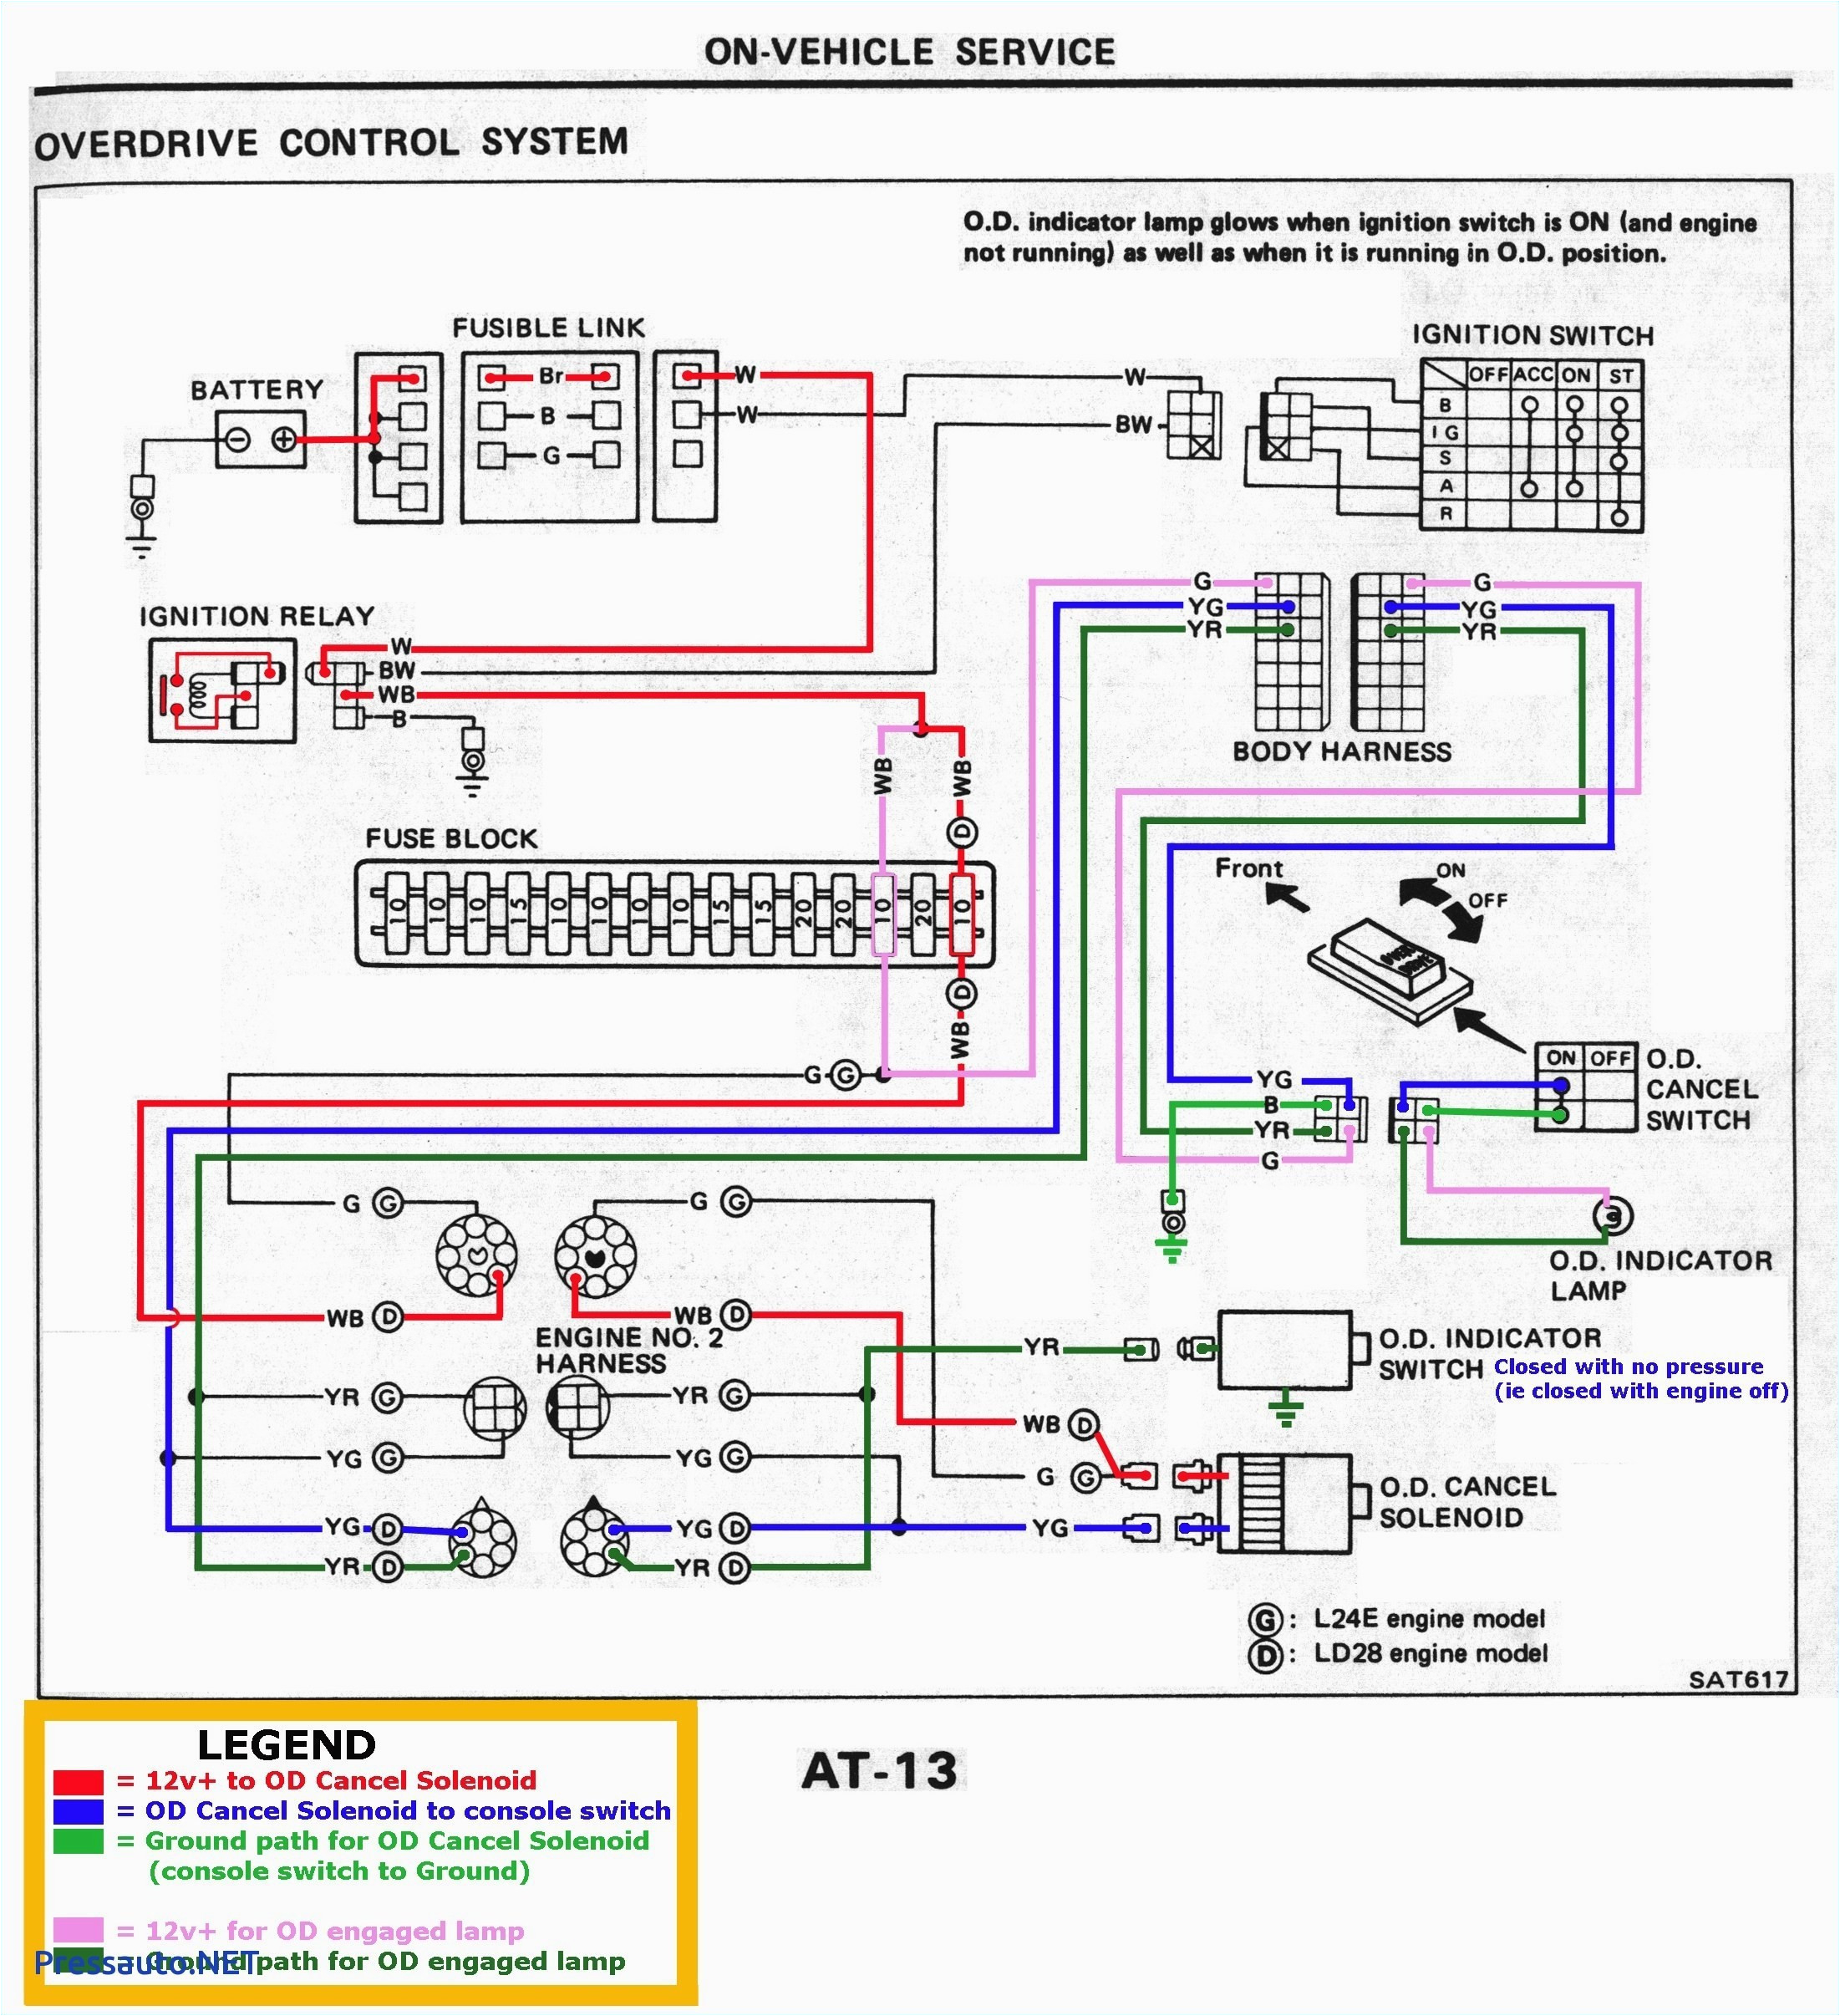 1970 camaro wiring harness wiring diagram today70 camaro tcs switch wiring harness diagram wiring diagram operations